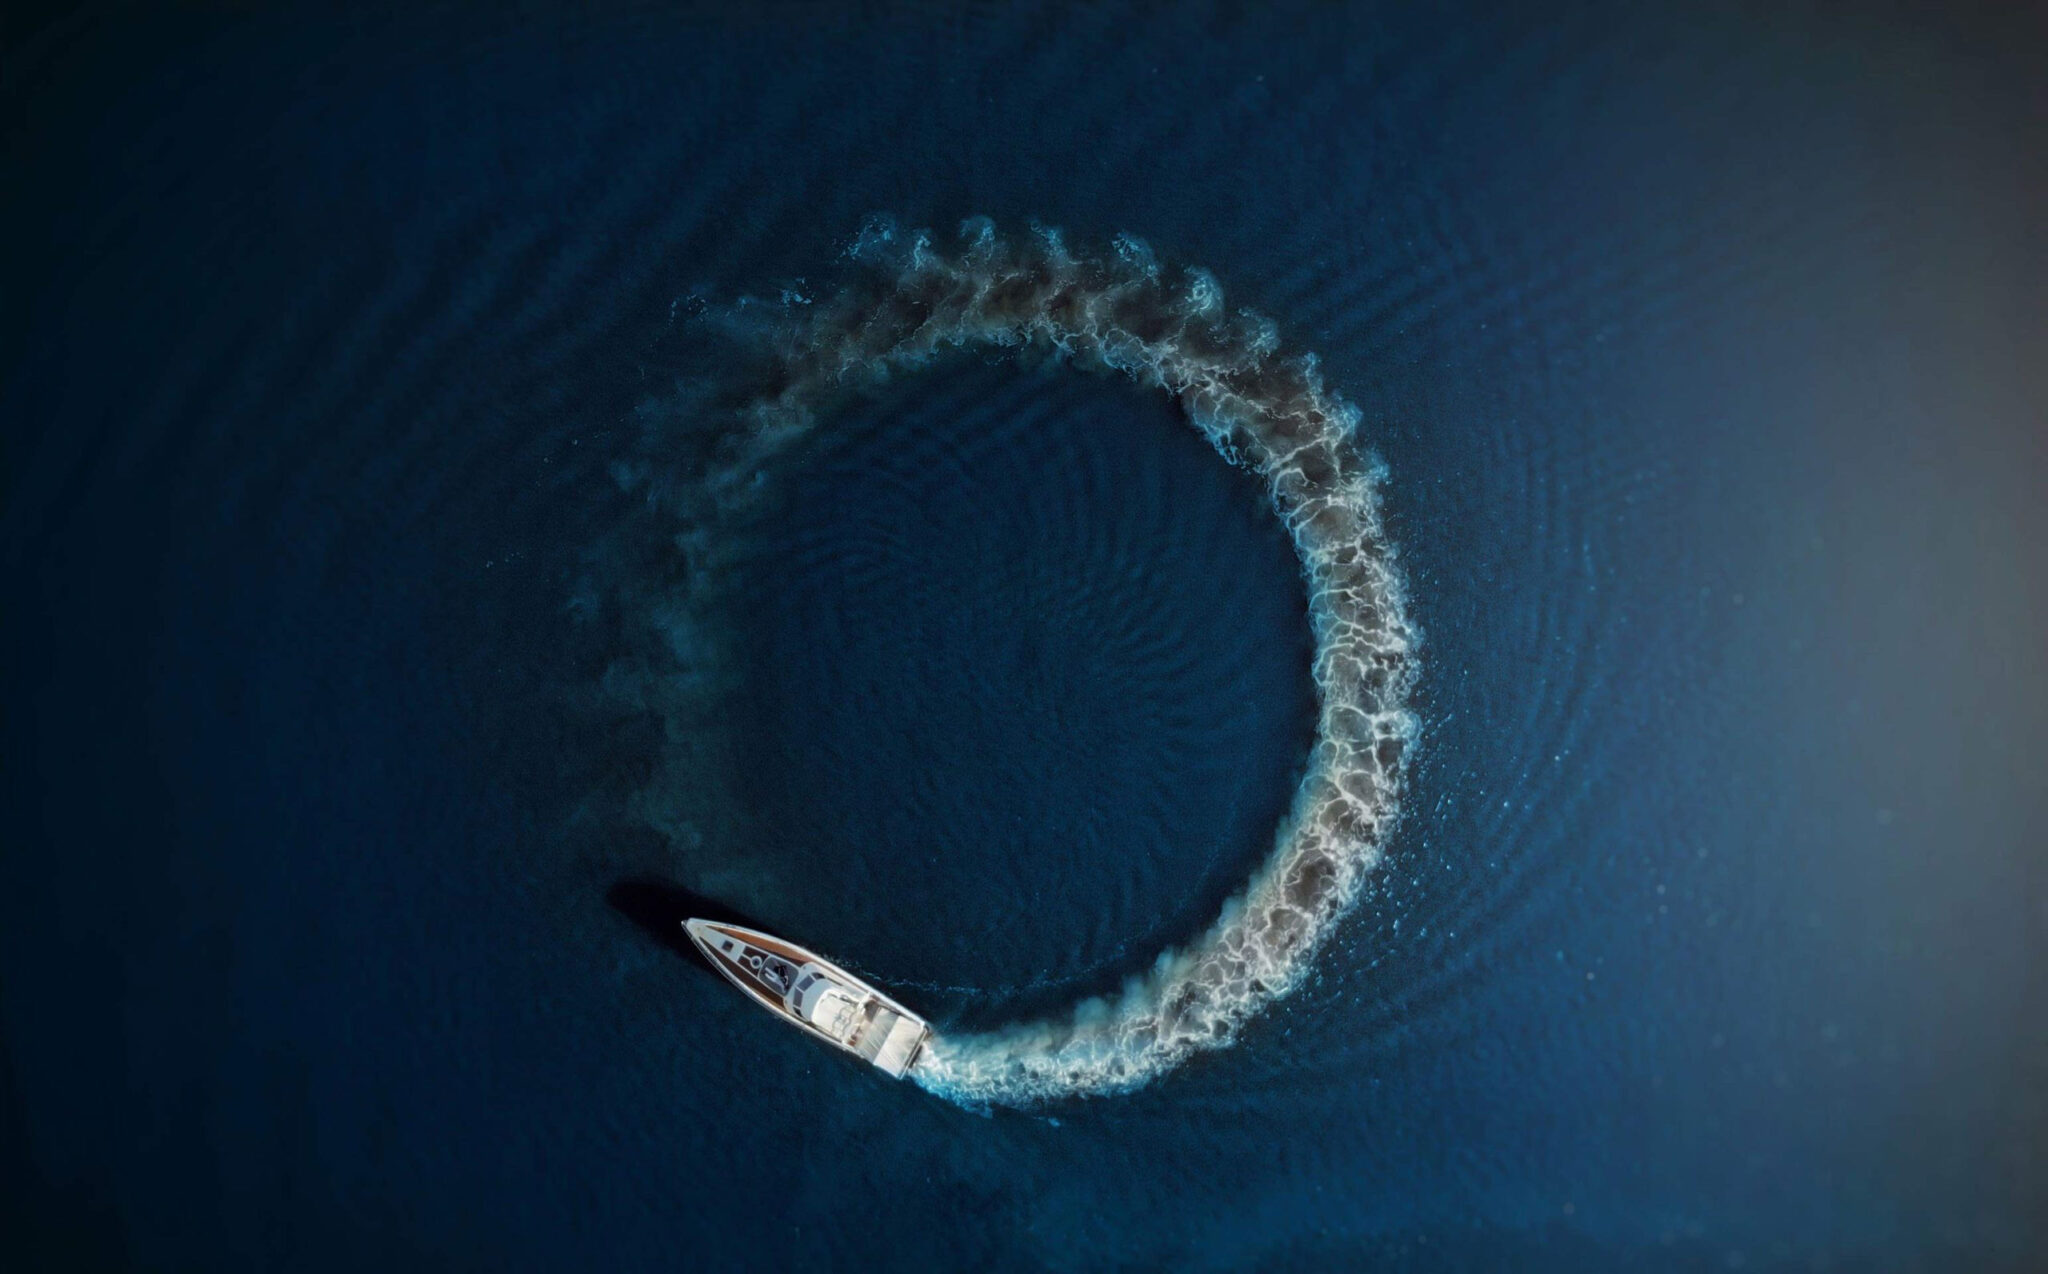 Tampa Website Design branding image of a boat circling from an overhead drone shot.